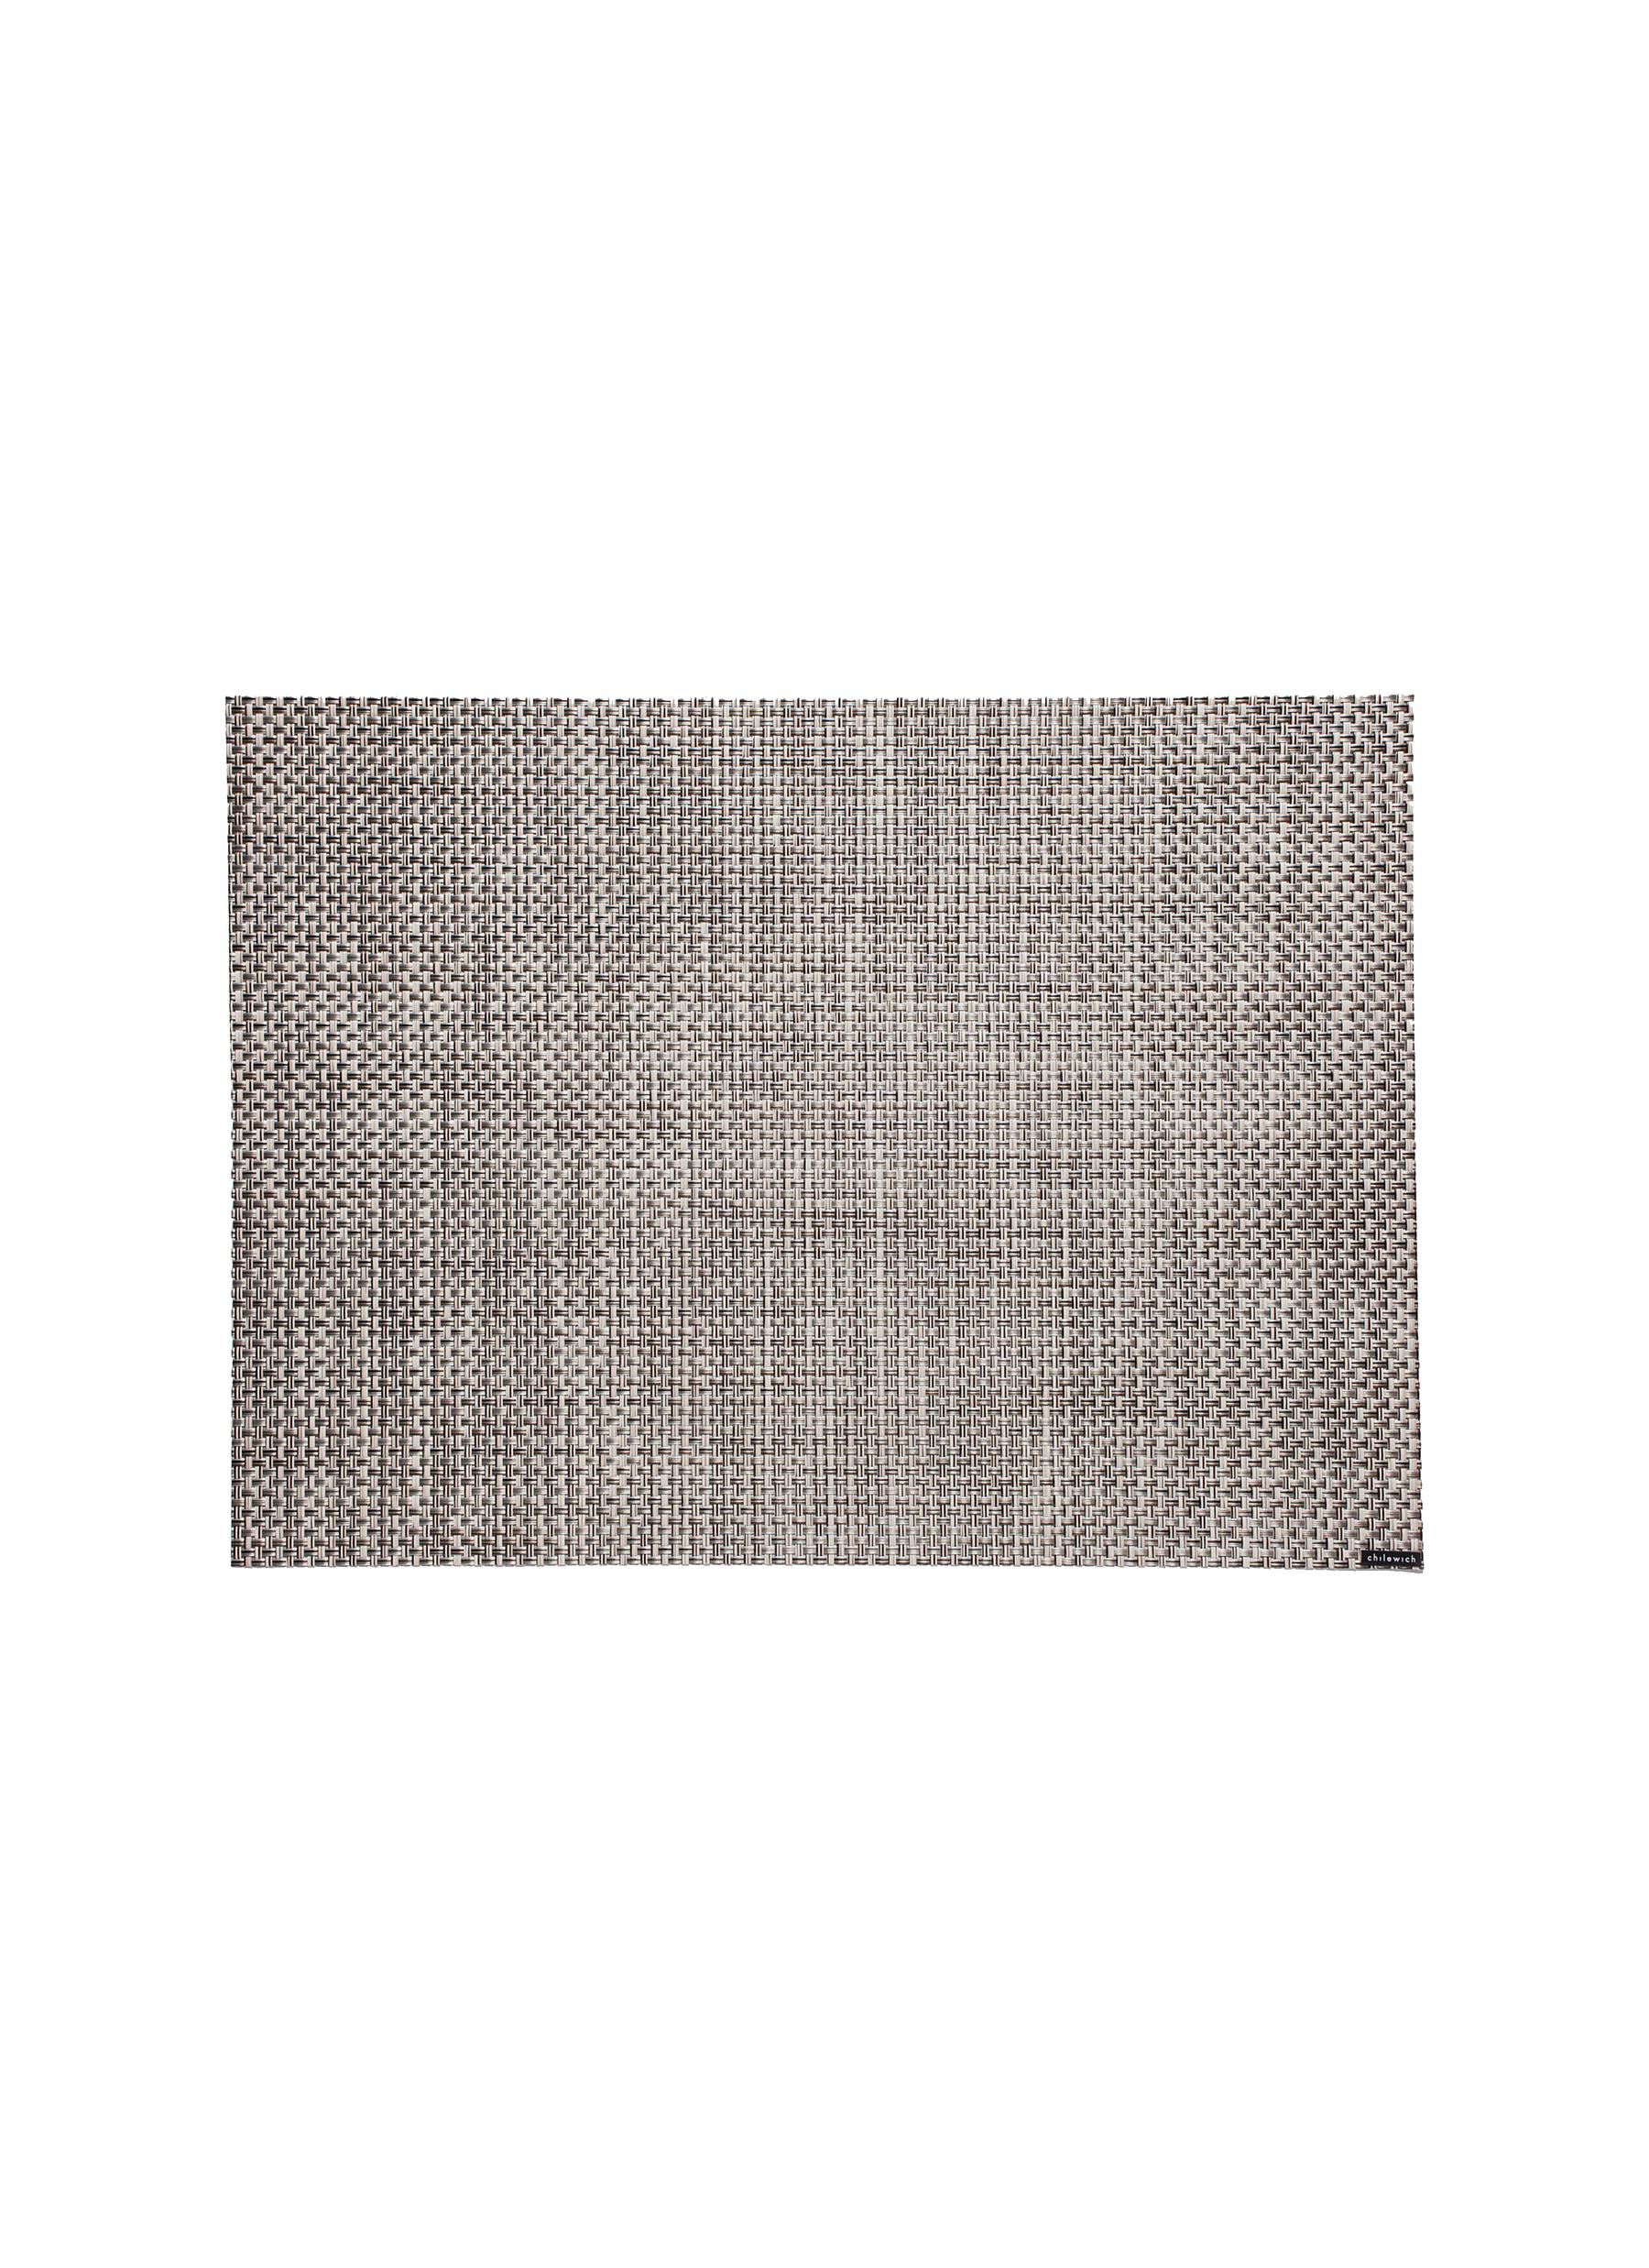 BASKETWEAVE COMPACT RECTANGLE PLACEMAT - OYSTER